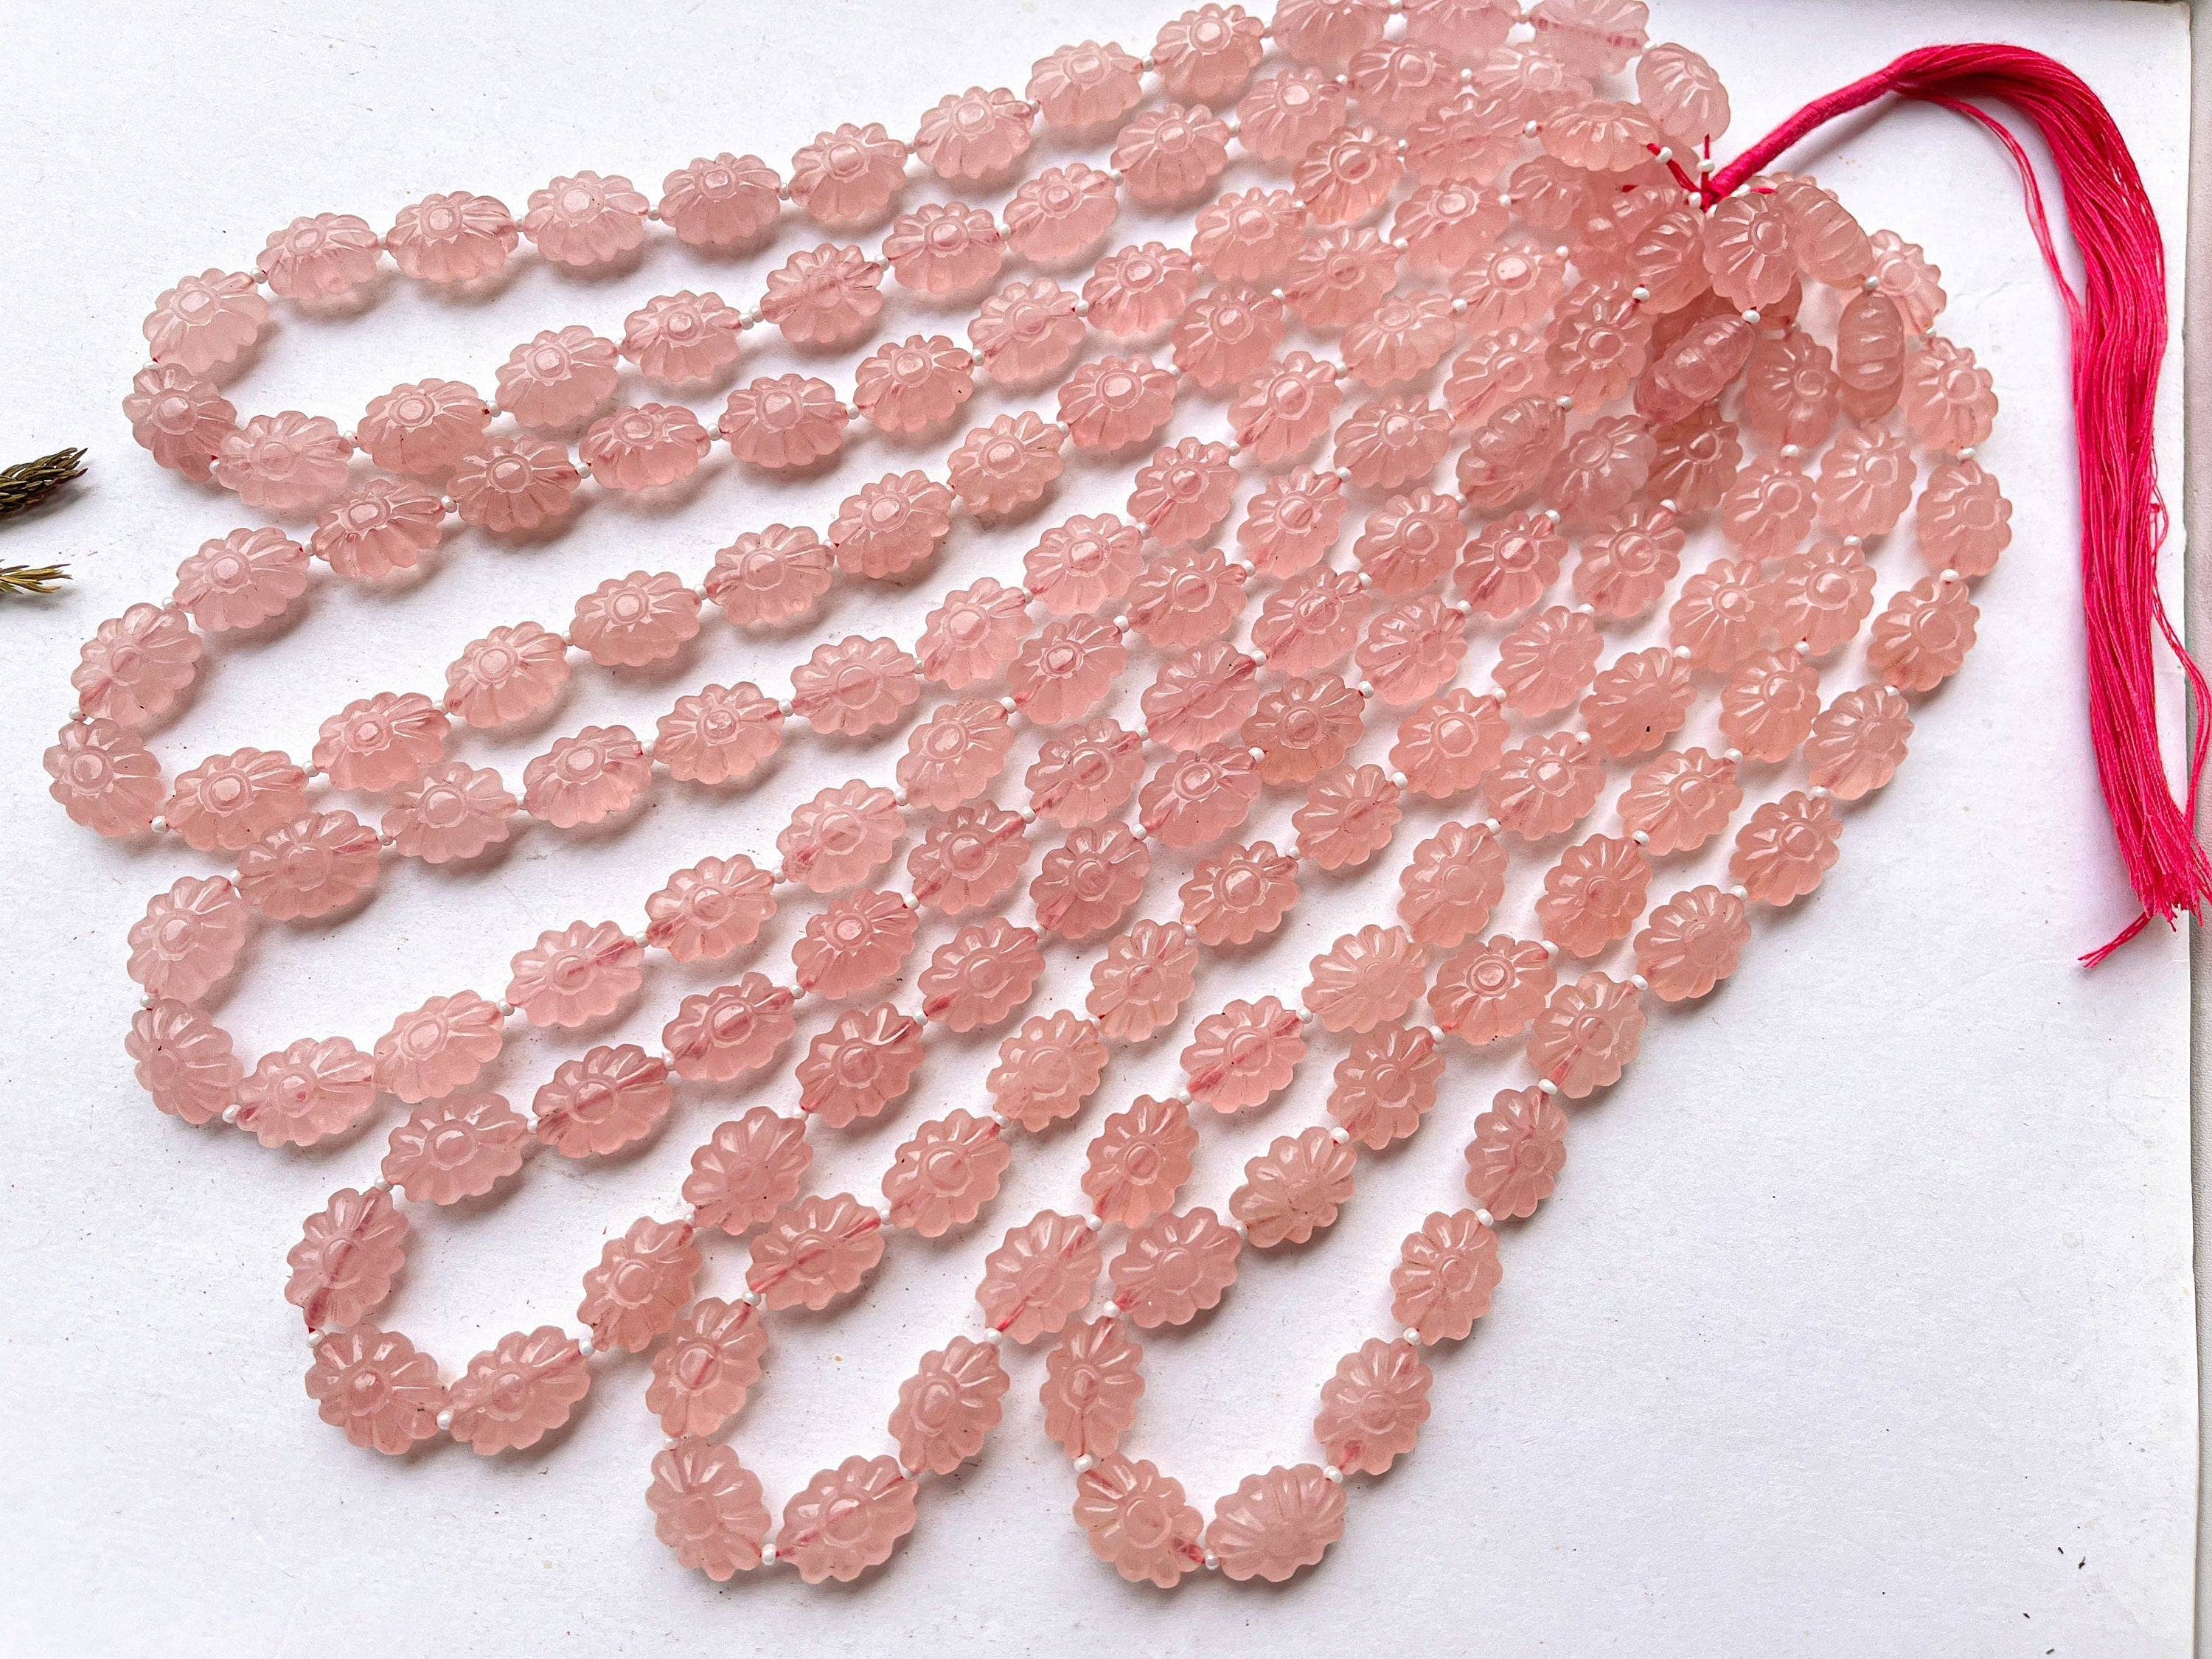 16 Inch Rose Quartz Flower Carved Beads Beadsforyourjewelry